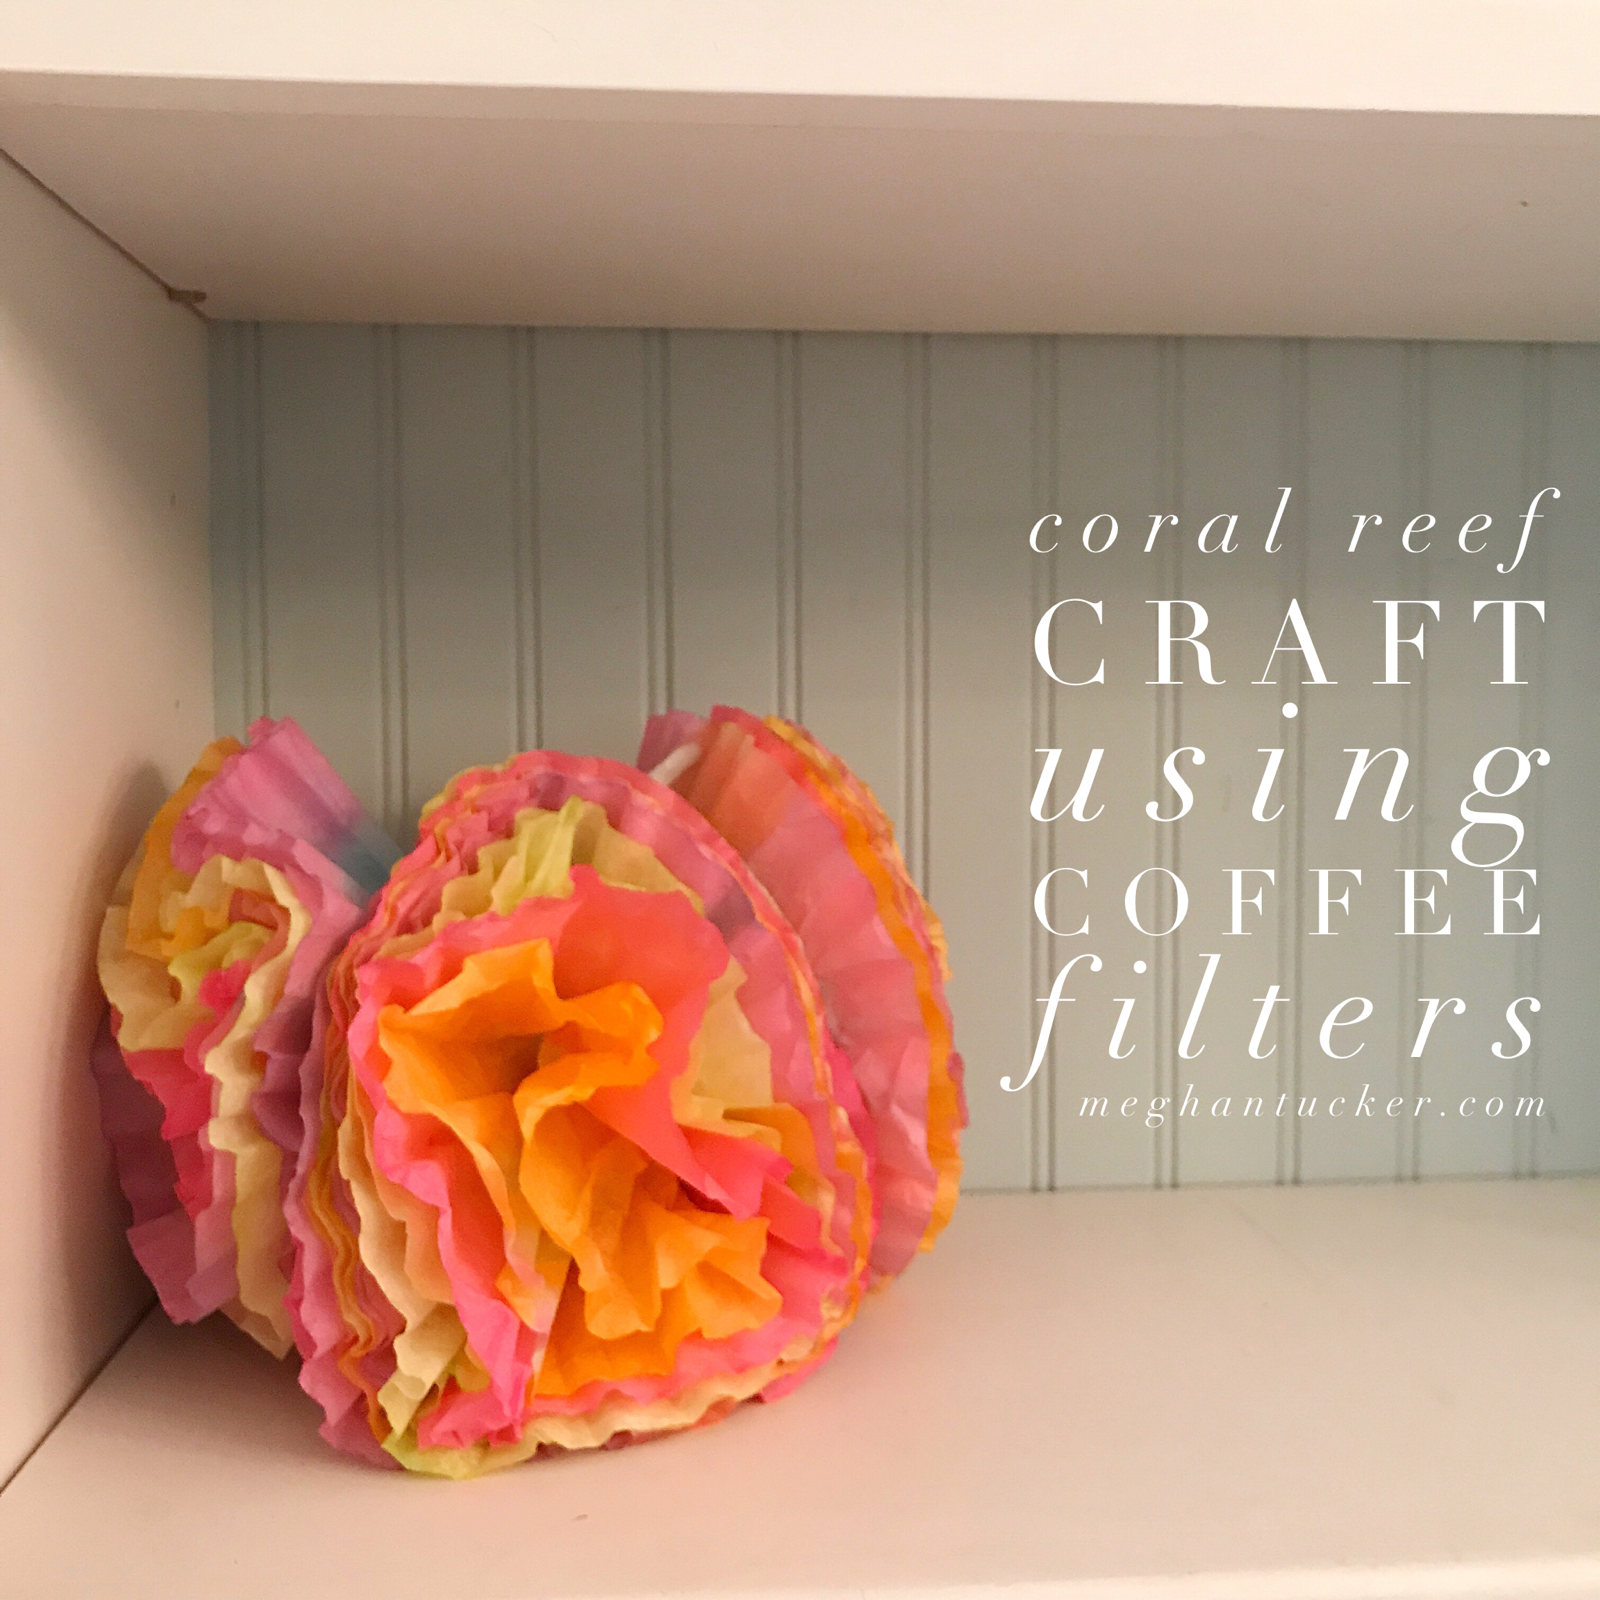 Coral Reef Craft Using Coffee Filters